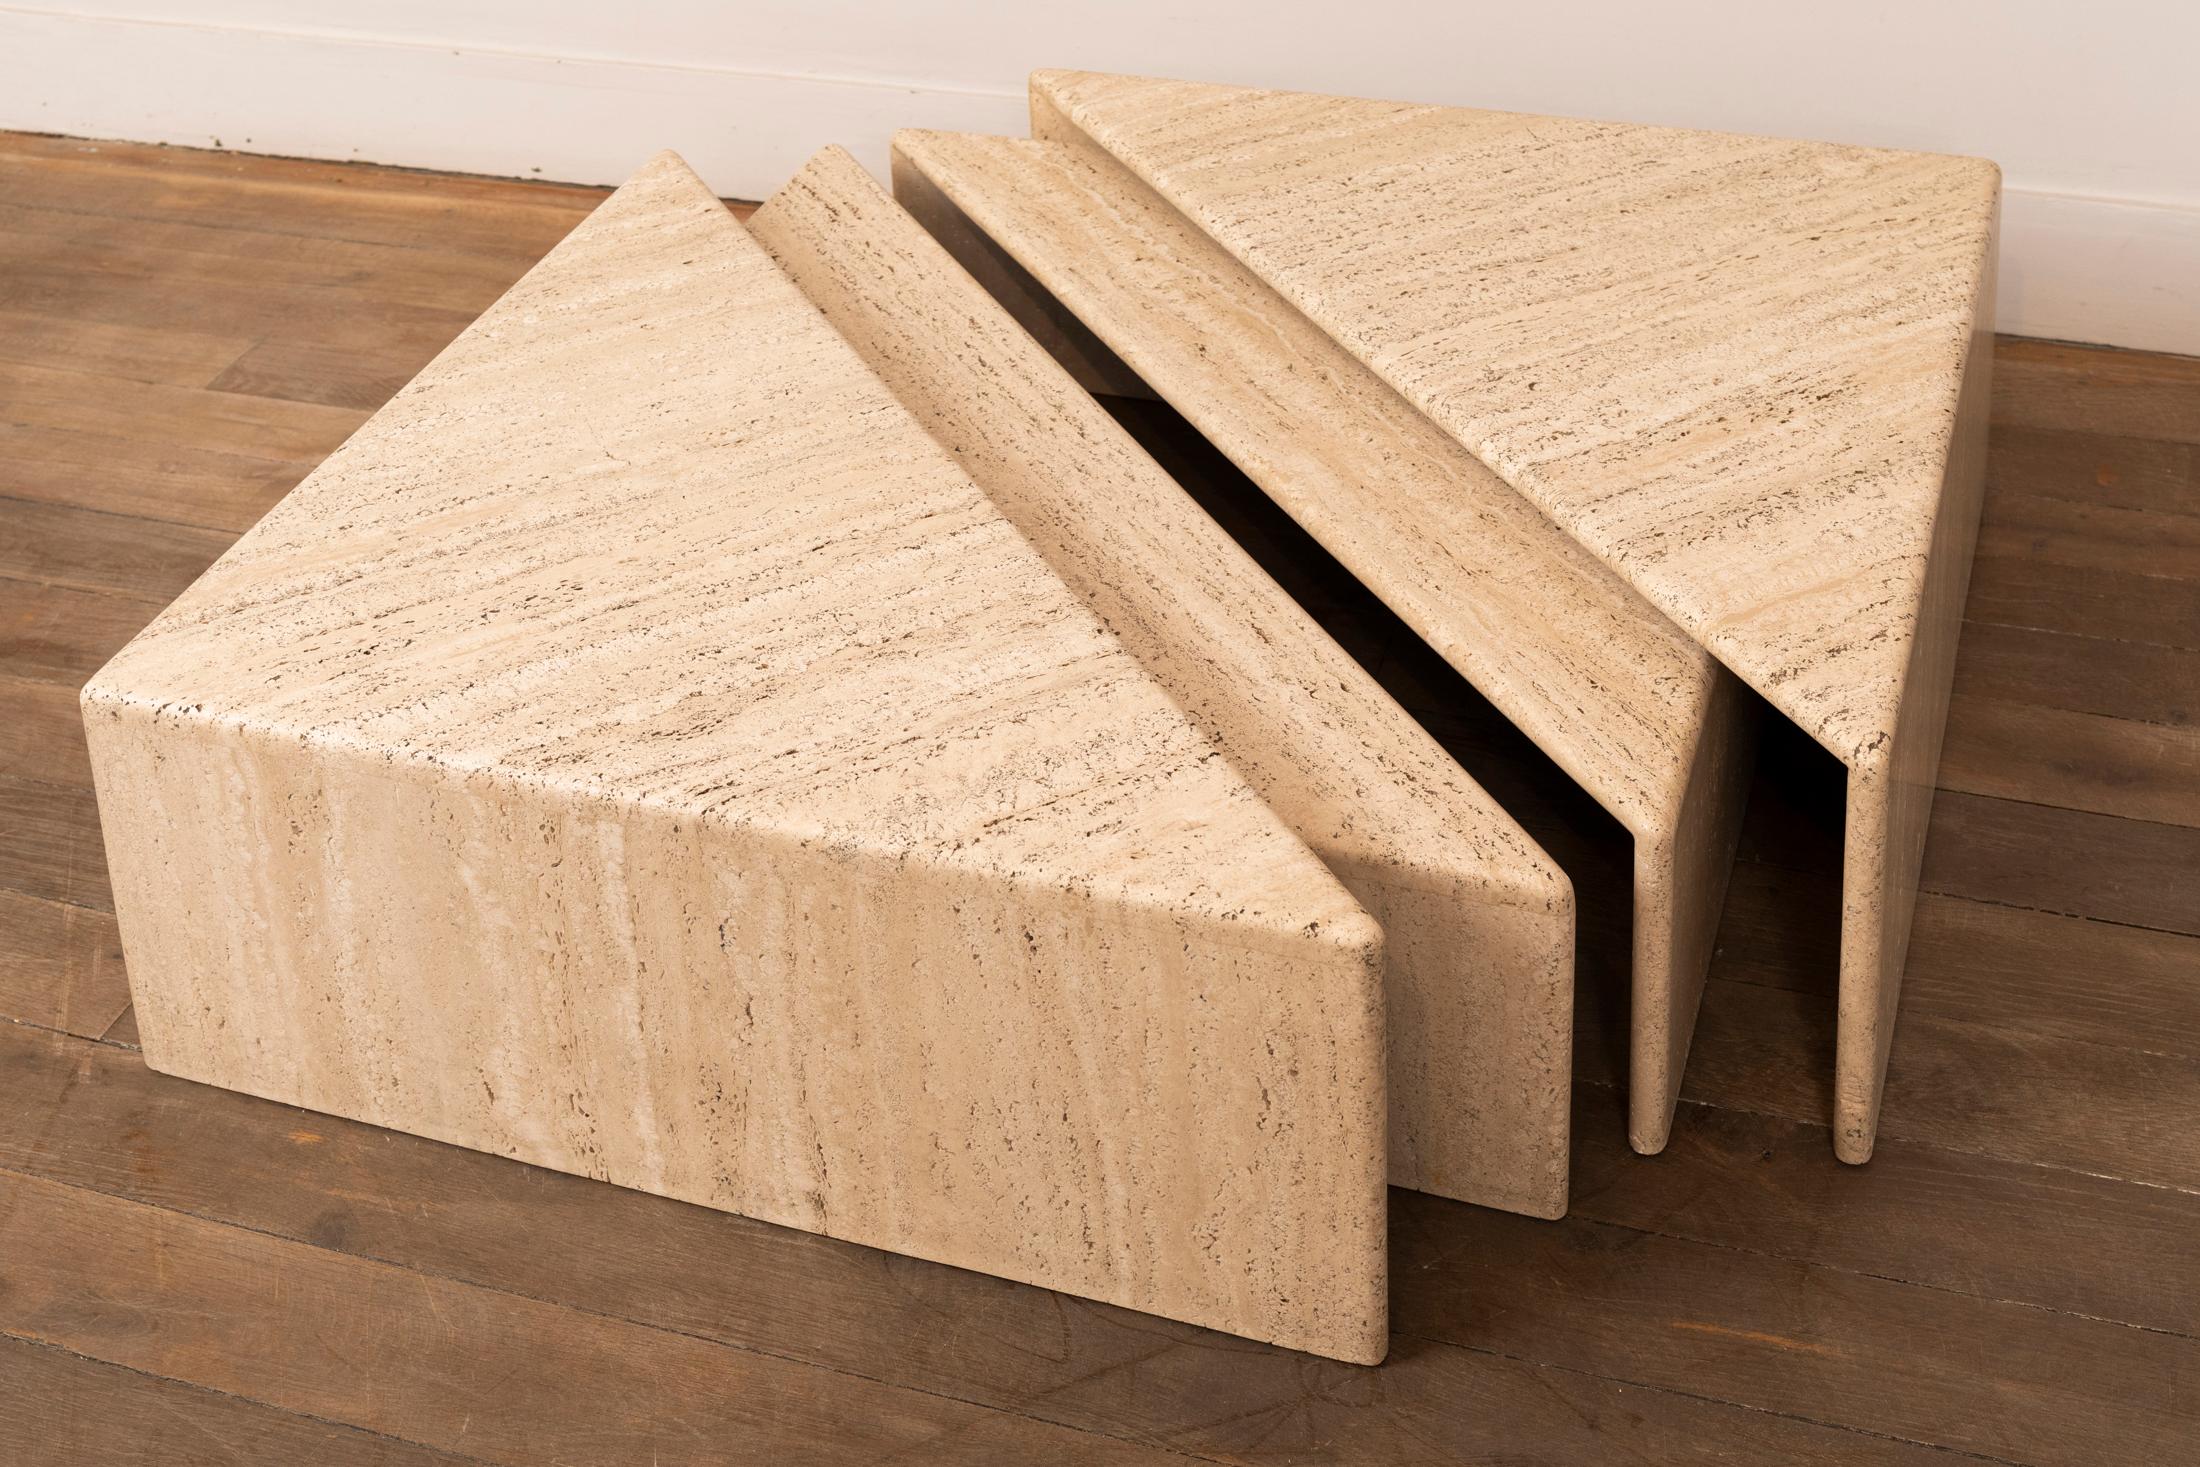 A set of 4 triangular elements forming two squares.
Travertine
It's possible to combine these elements in many ways to form one or more coffee tables.
Italy, 1970s.

Measures: 
Square 1 : 28 x 70 x 70 cm // 11 x 27.5 x 27.5 in.
Square 2 : 23